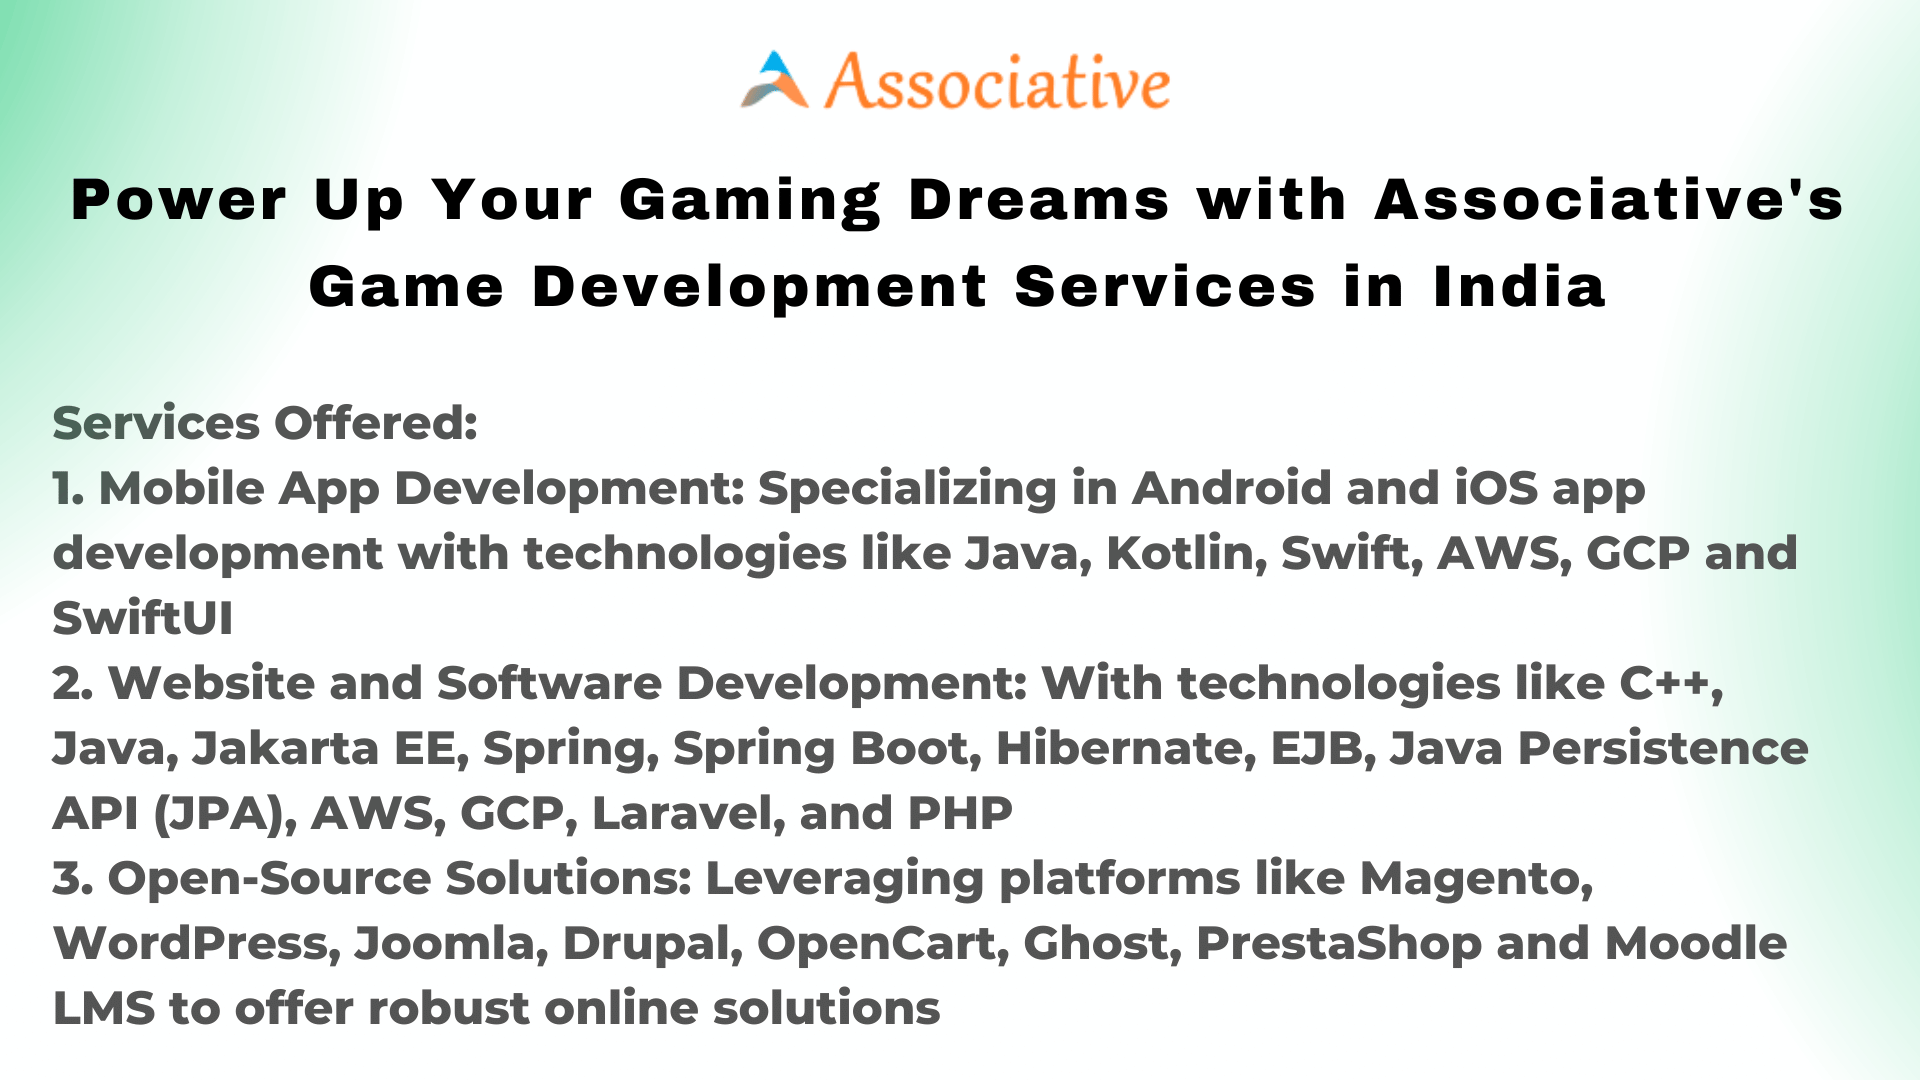 Power Up Your Gaming Dreams with Associative's Game Development Services in India